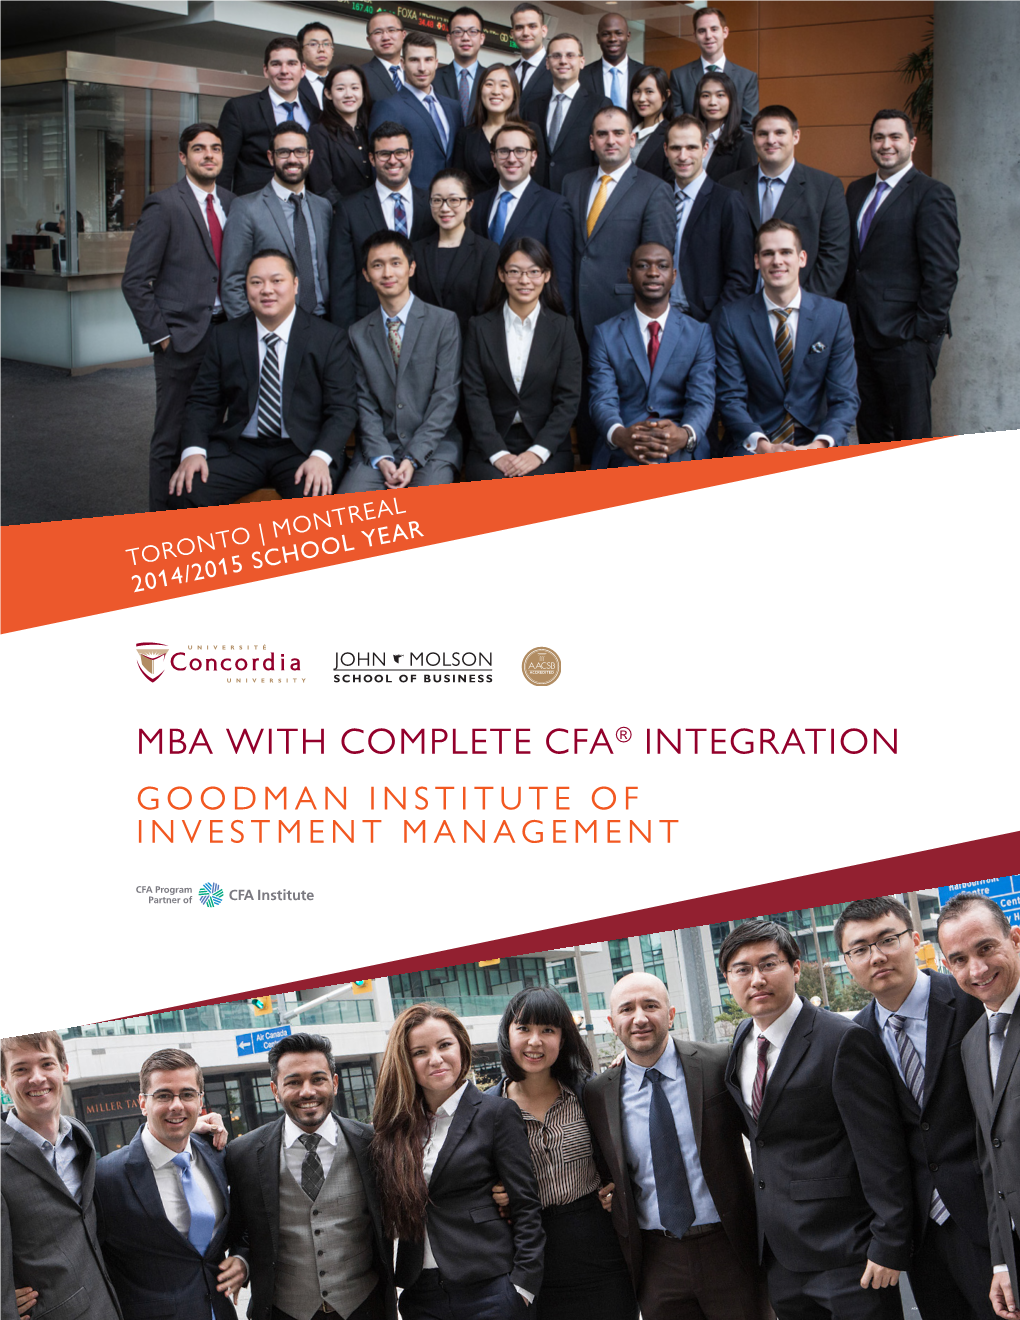 Mba with Complete Cfa® Integration Goodman Institute of Investment Management